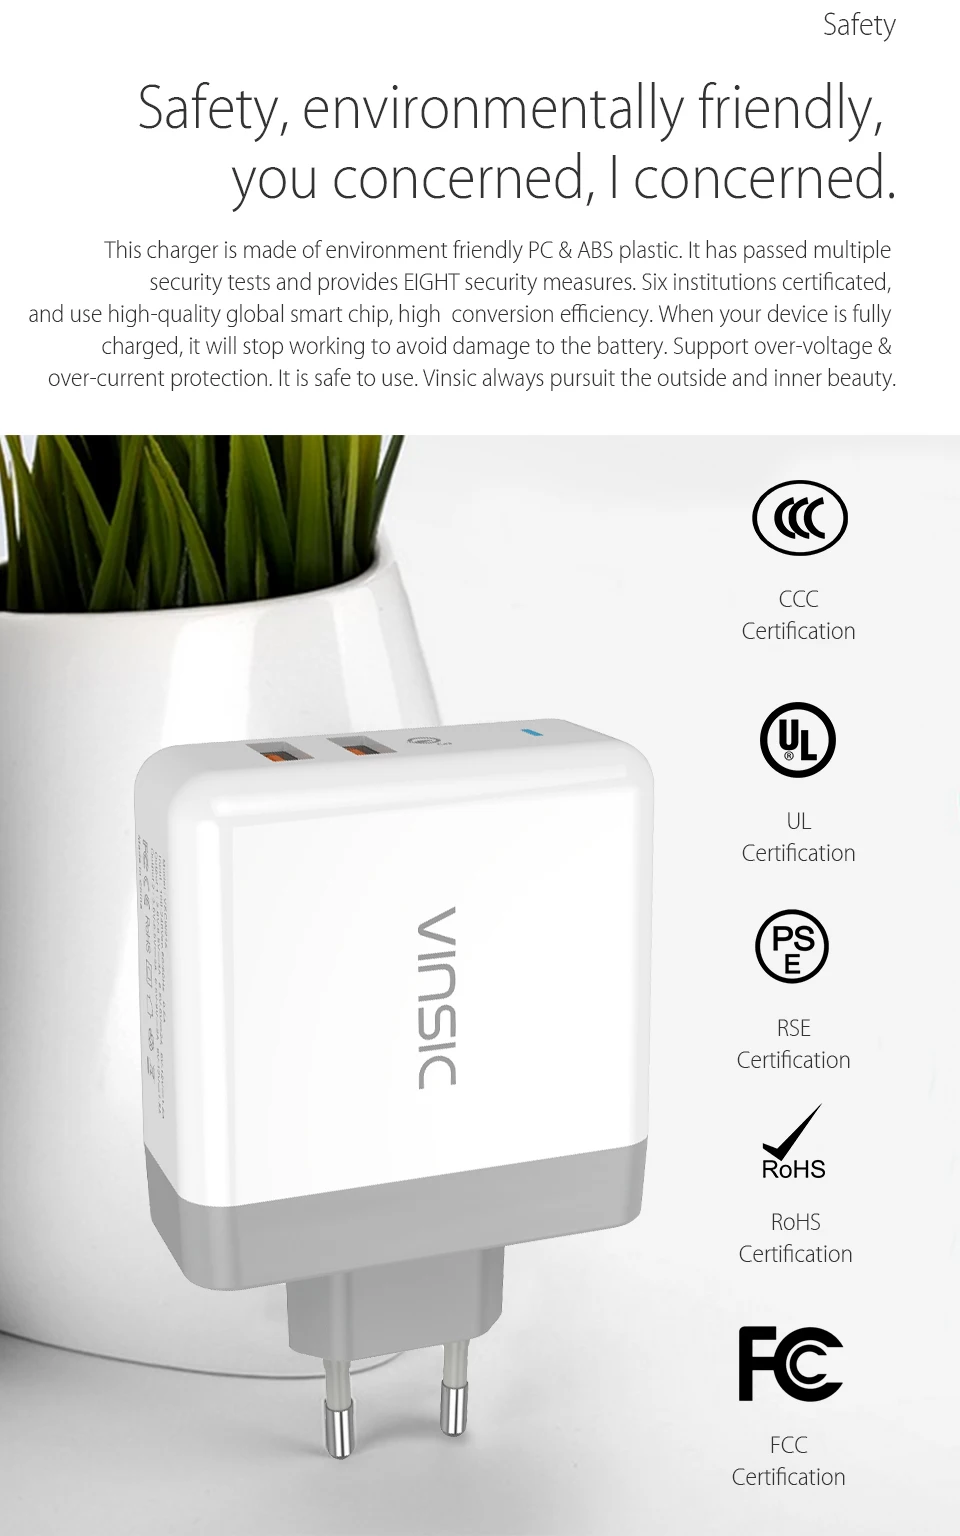 Vinsic 36W Quick Charge 3.0 QC3.0 Dual USB Wall Charger Travel Charger for iPhone/iPad Samsung Galaxy S7/S6/Edge Mi5 EU US Plug